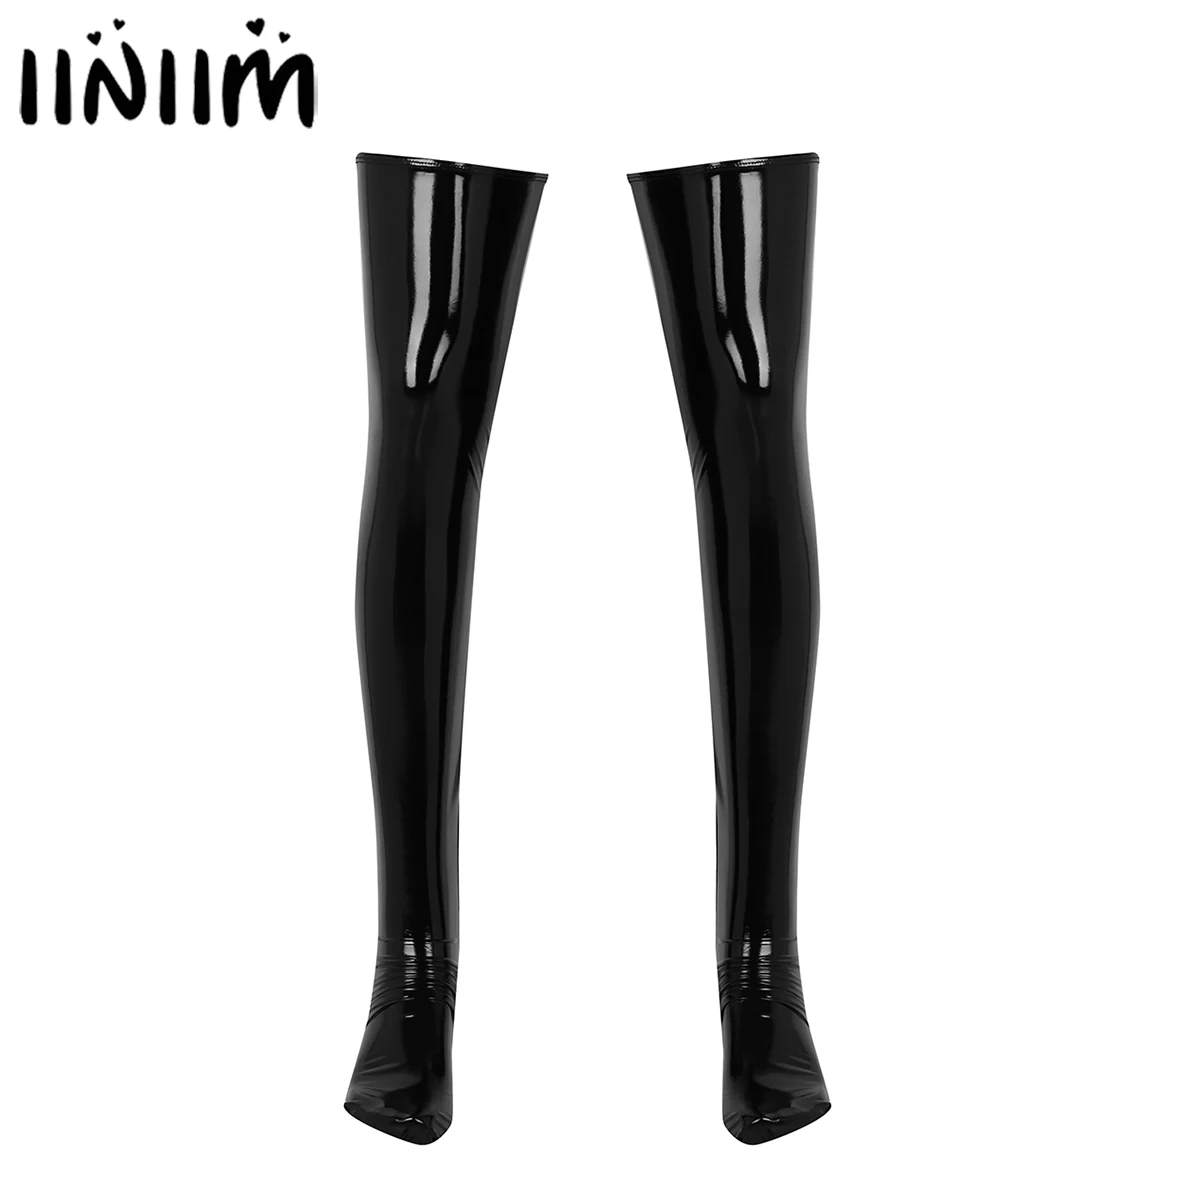 Sexy Stockings Mens Latex Long Sock Anti-Skid Soft Wetlook PVC Leather Thigh High Footed Stockings Hot Club Wear Exotic Lingerie